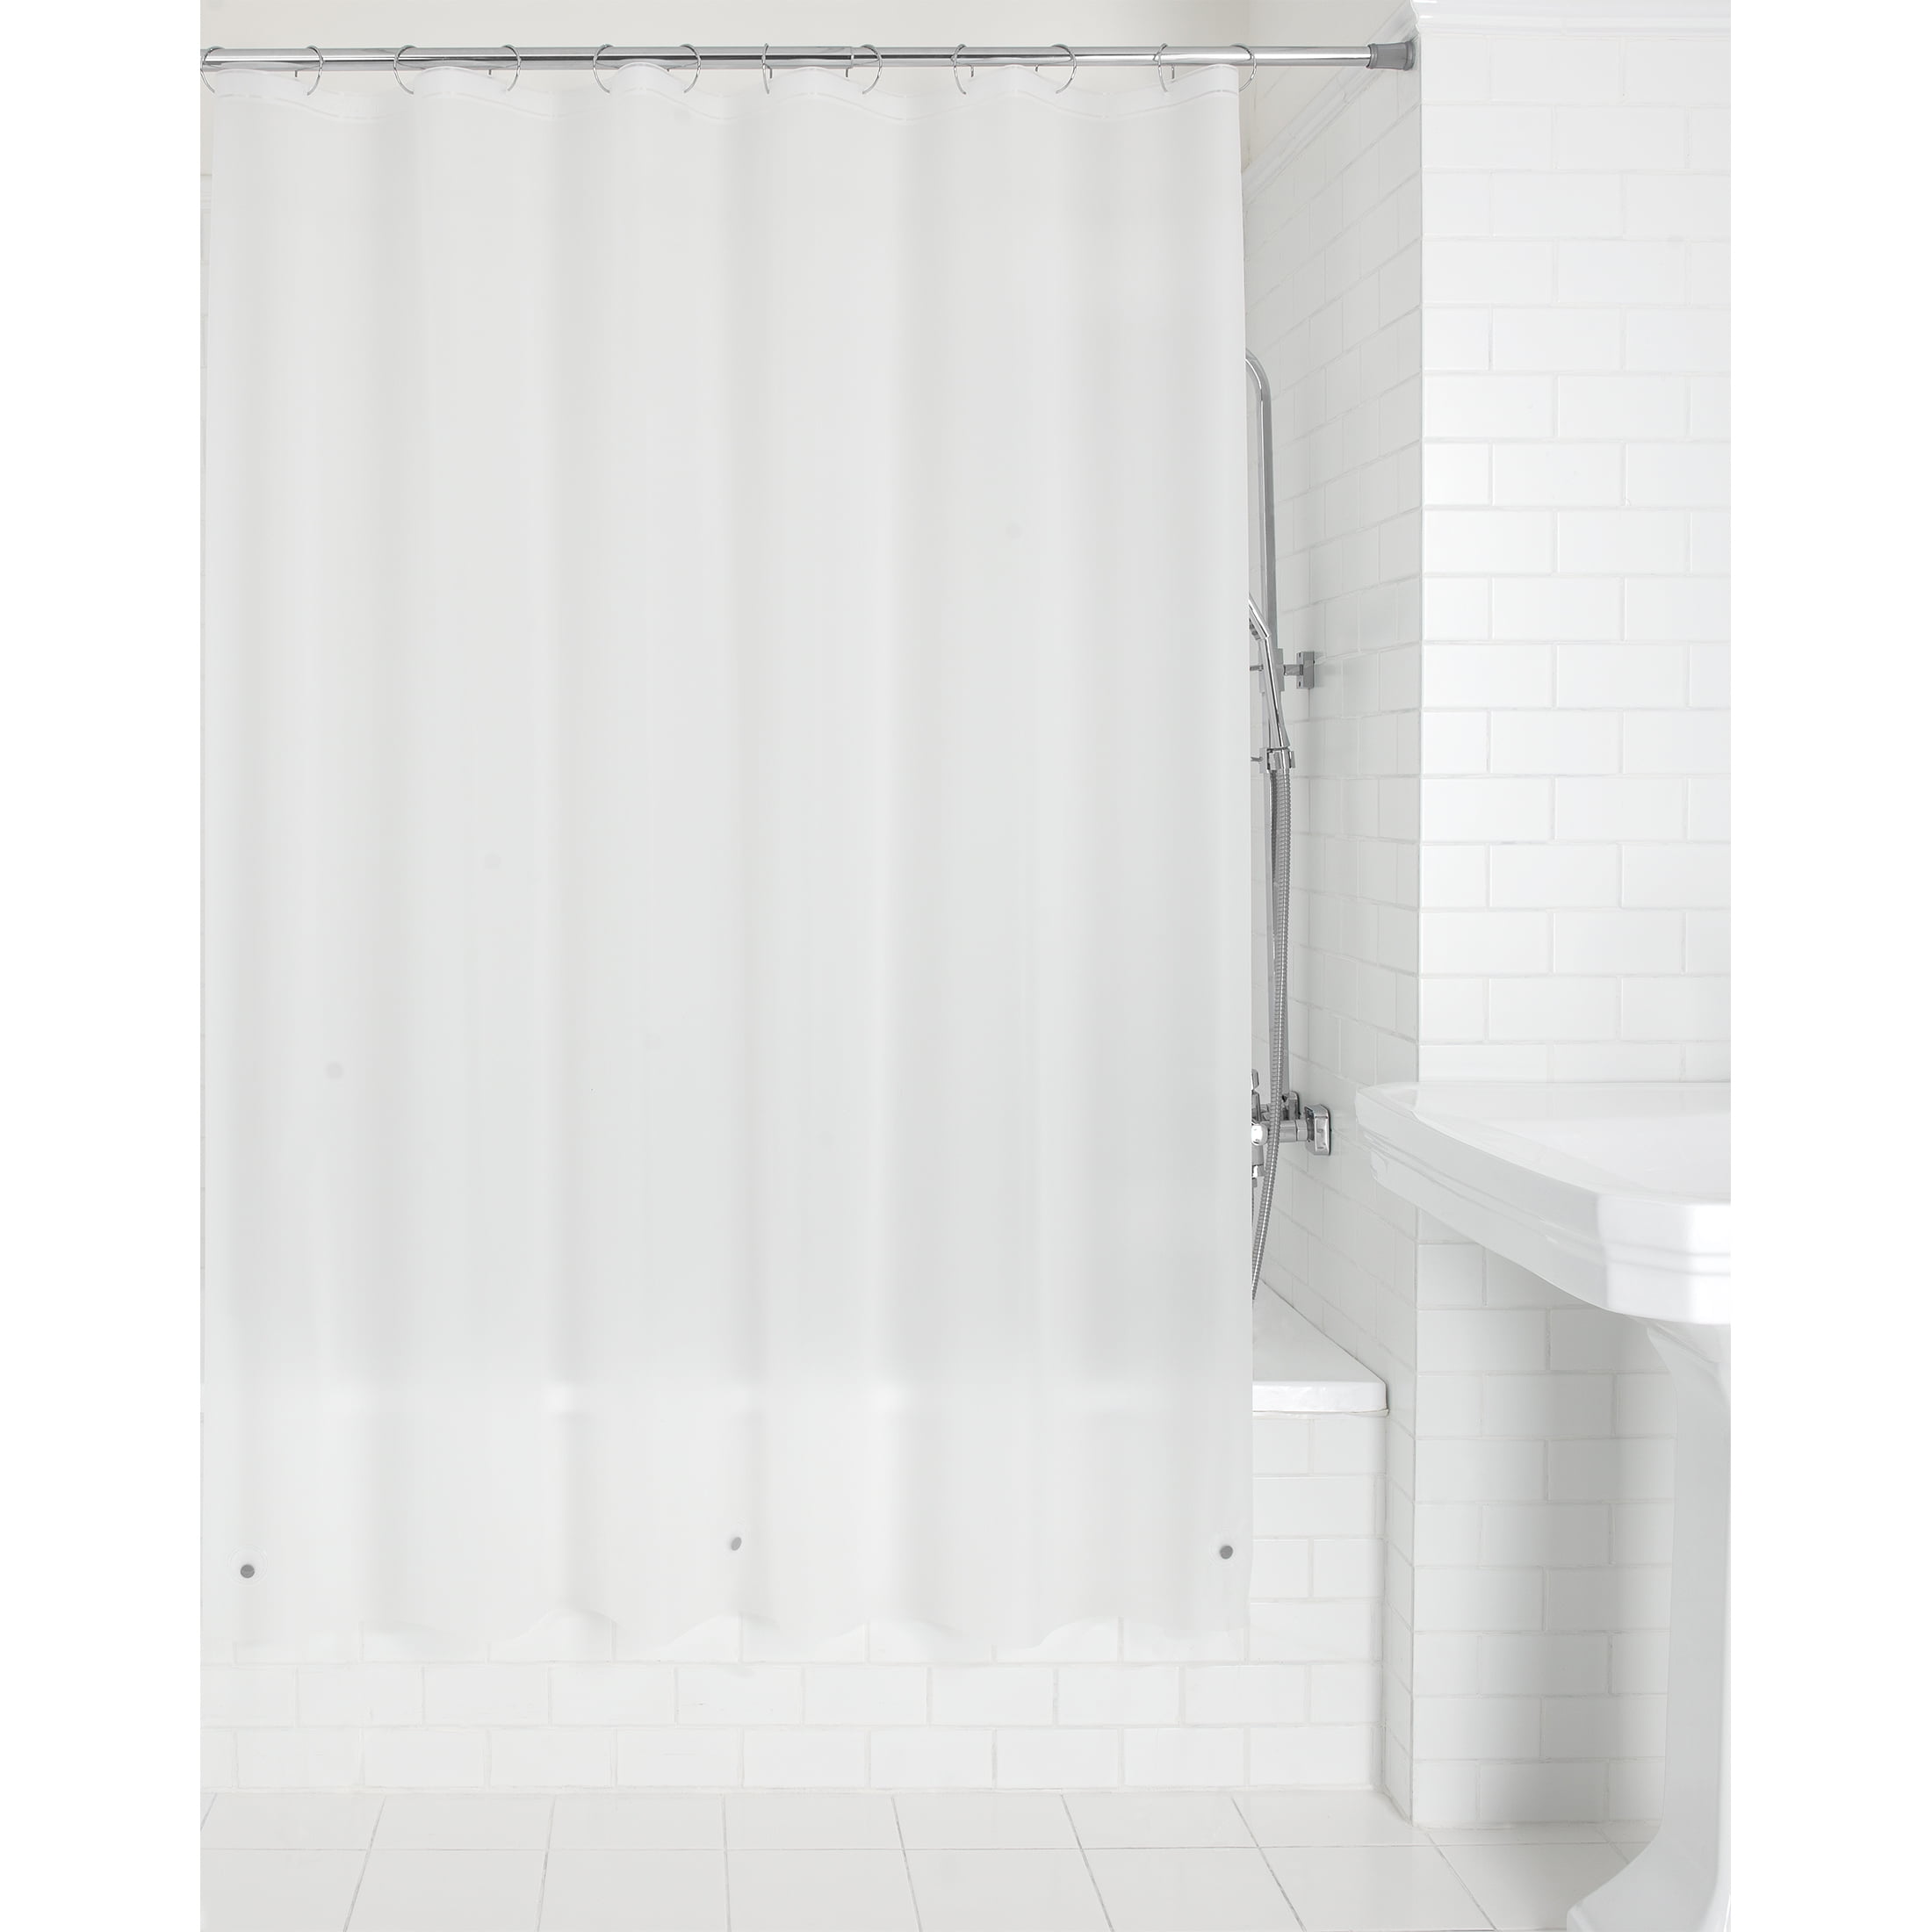 Mainstays Light Weight Frosty Shower, Frosted Shower Curtain Liner